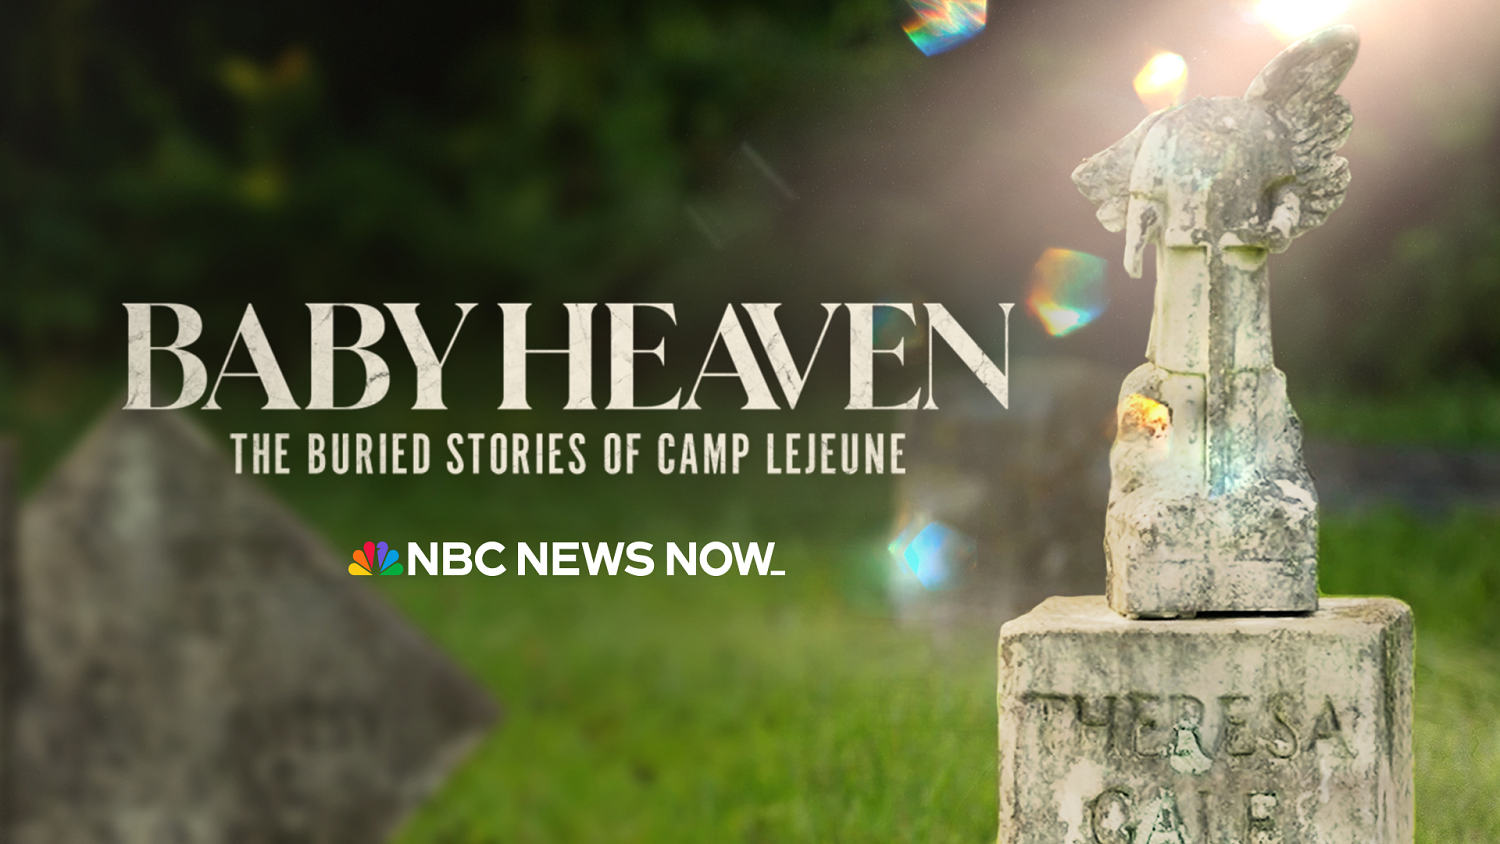 'Baby Heaven: The Buried Stories of Camp Lejeune'